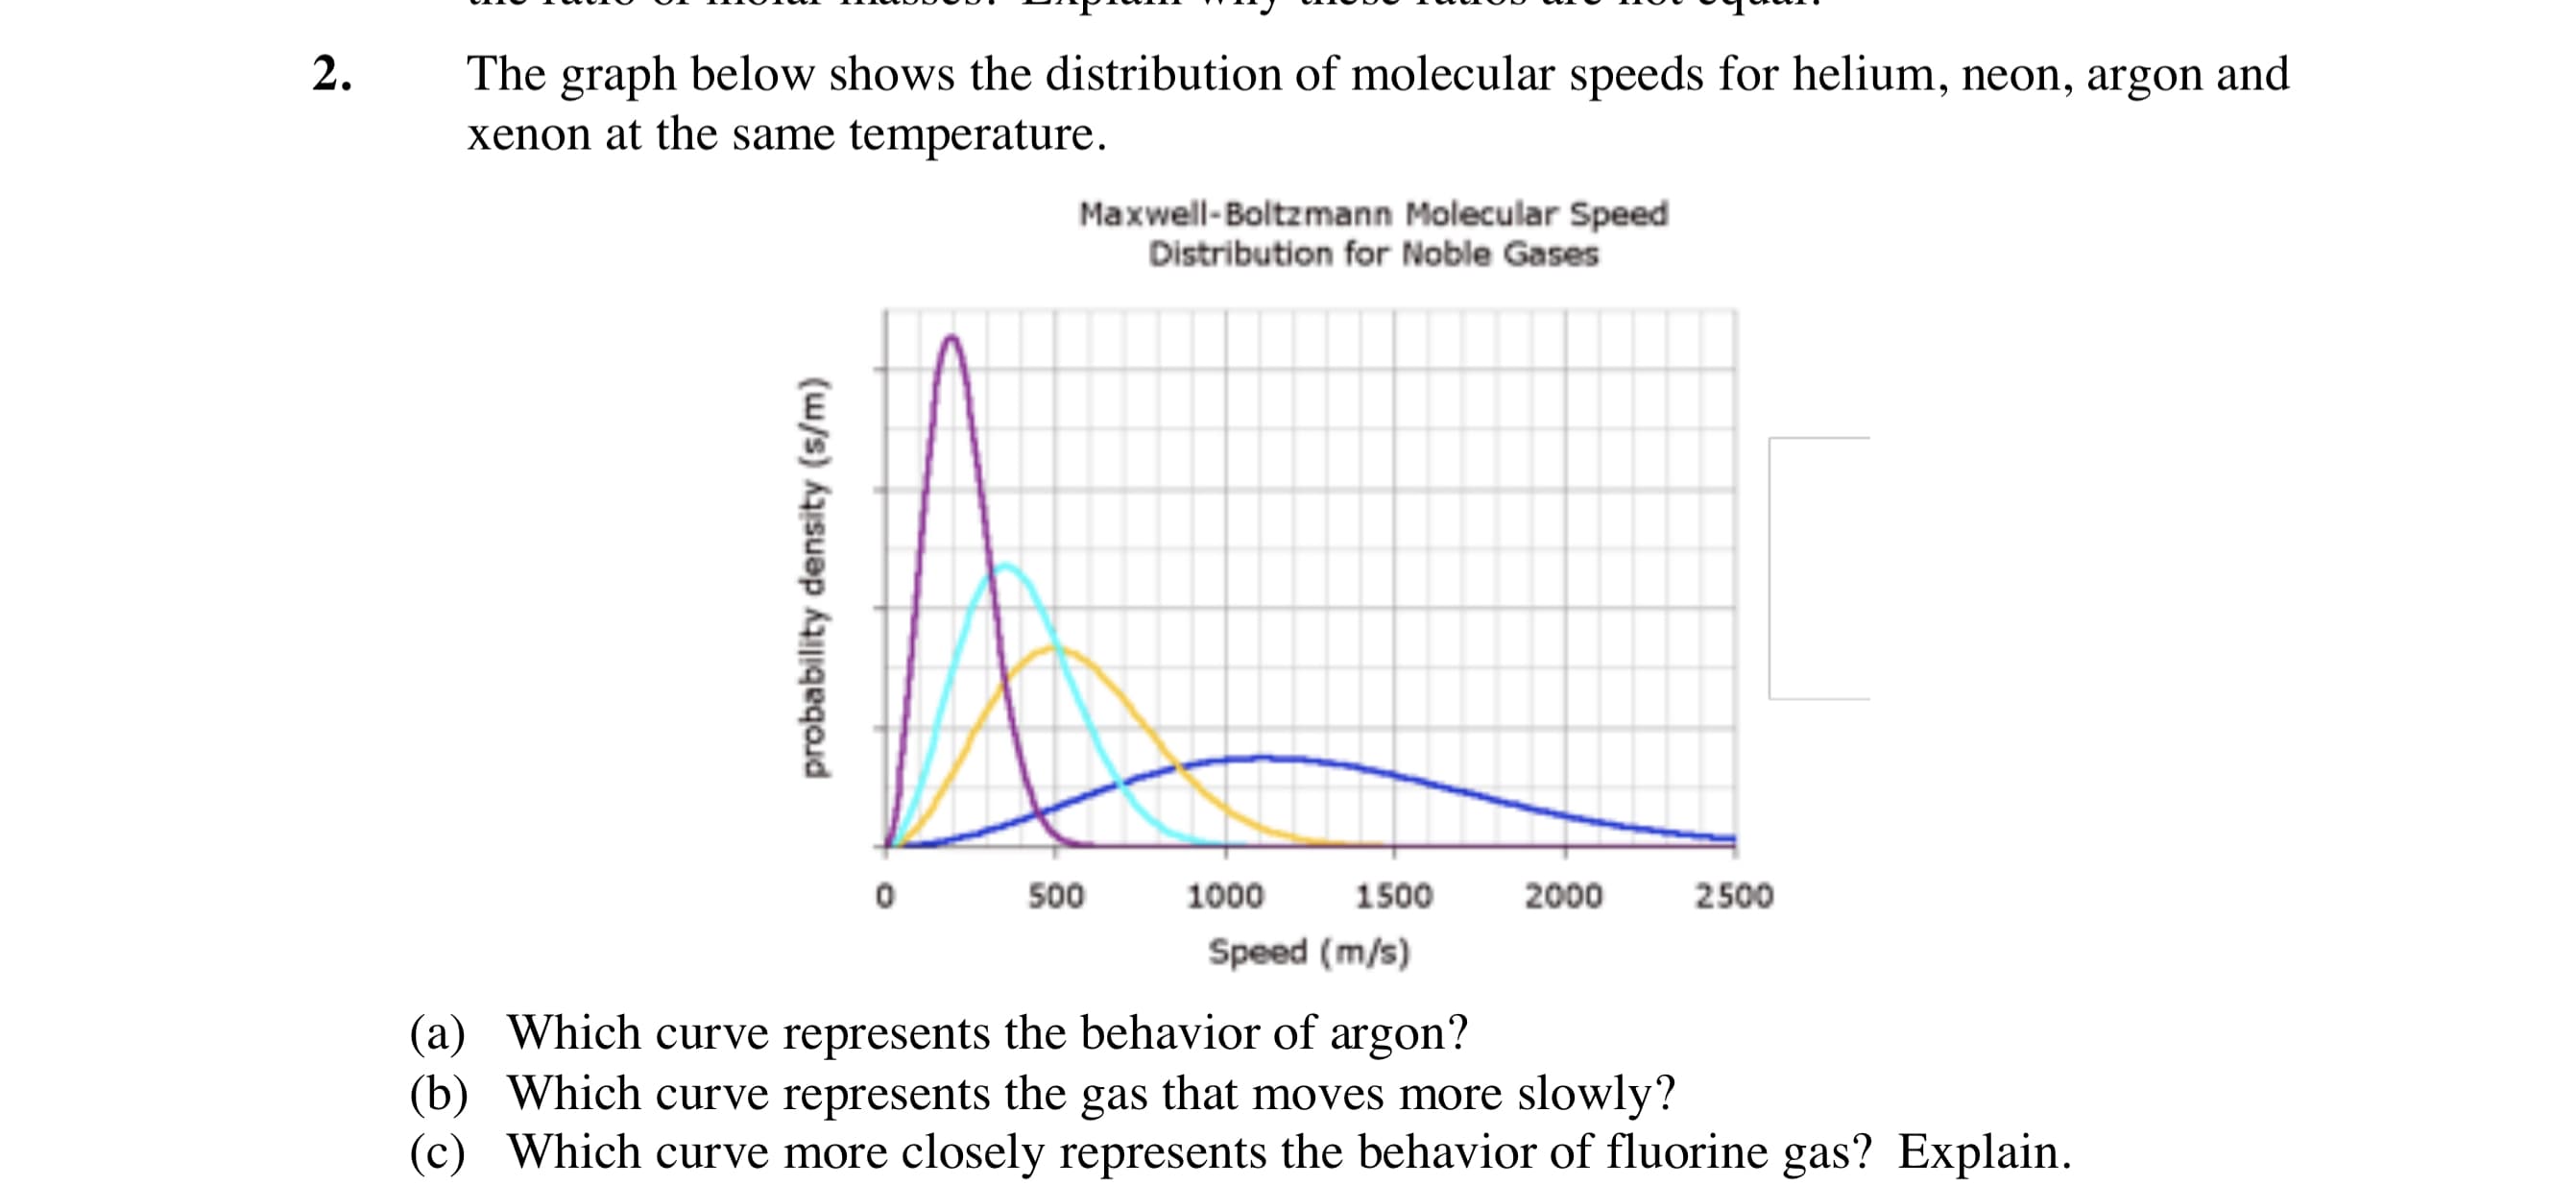 The graph below shows the distribution of molecular speeds for helium, neon, argon and
xenon at the same temperature.
Maxwell-Boltzmann Molecular Speed
Distribution for Noble Gases
500
1000
1500
2000
2500
Speed (m/s)
(a) Which curve represents the behavior of argon?
(b) Which curve represents the gas that moves more slowly?
(c) Which curve more closely represents the behavior of fluorine gas? Explain.
2.
probability density (s/m)
